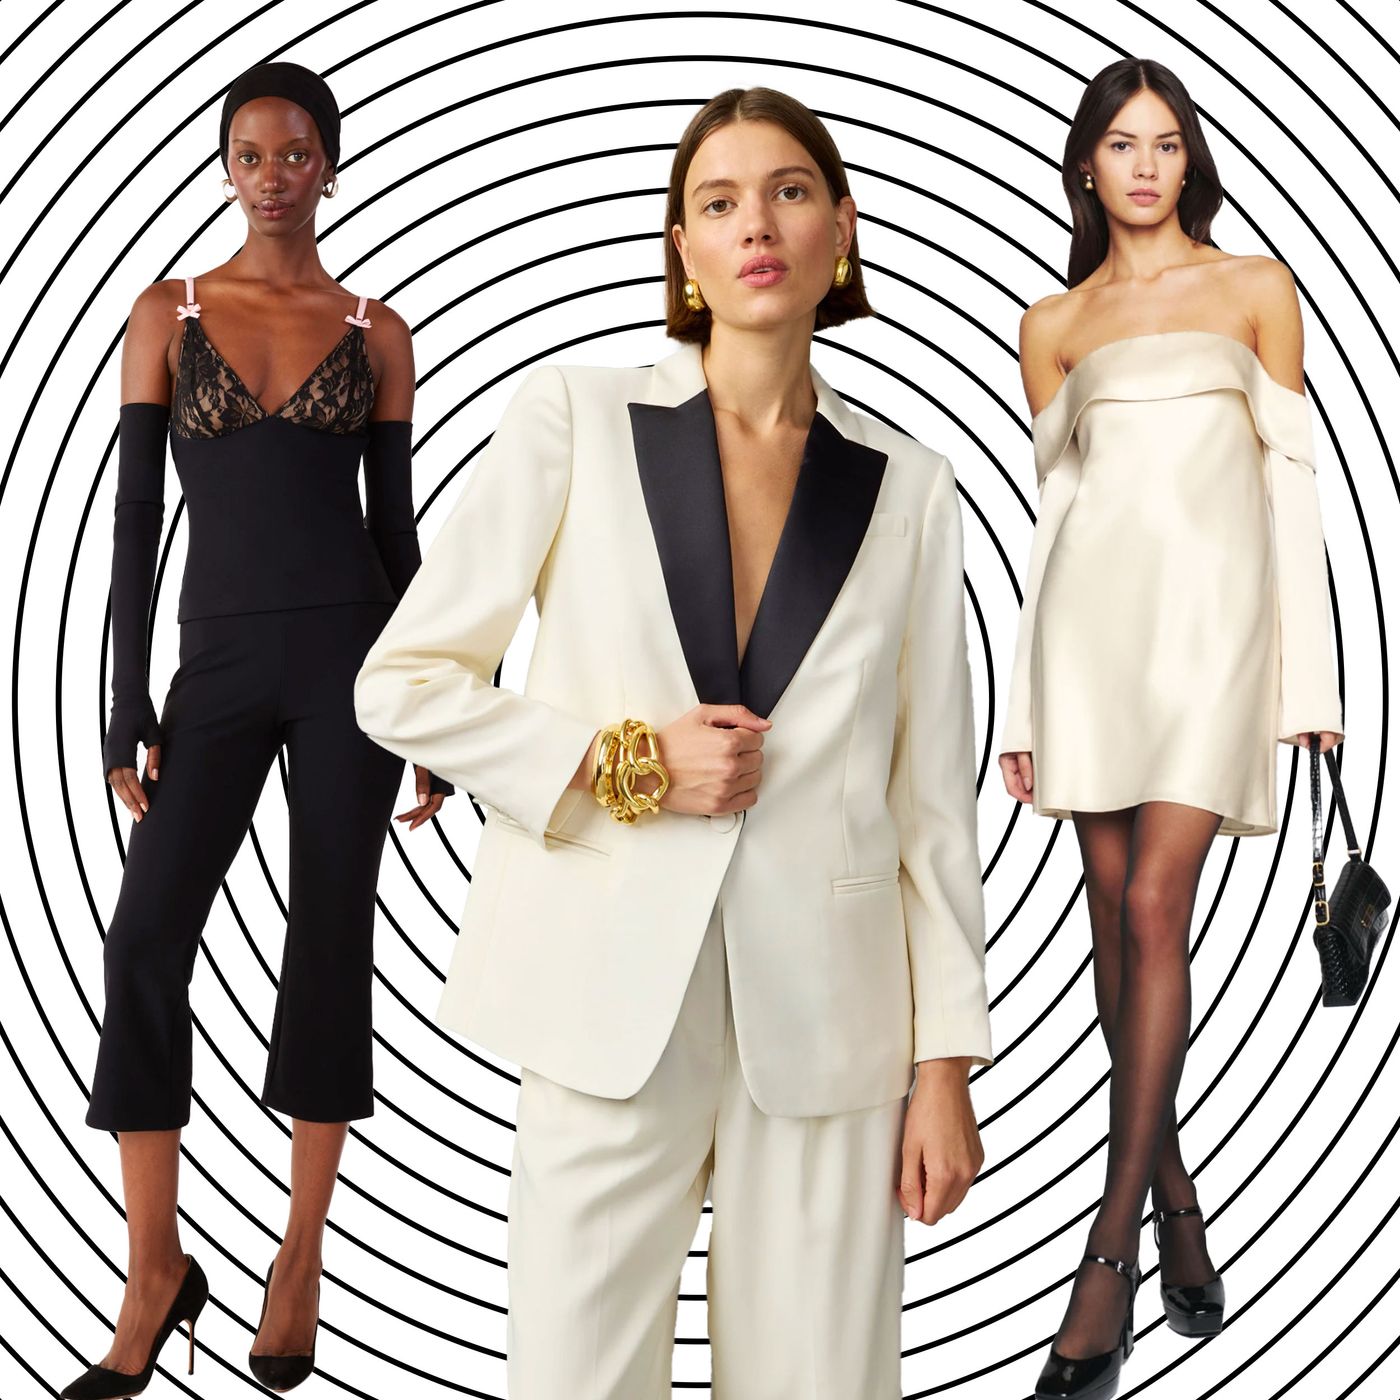 Three key trends to wear for your New Year's Eve outfit – Bad to the Blonde